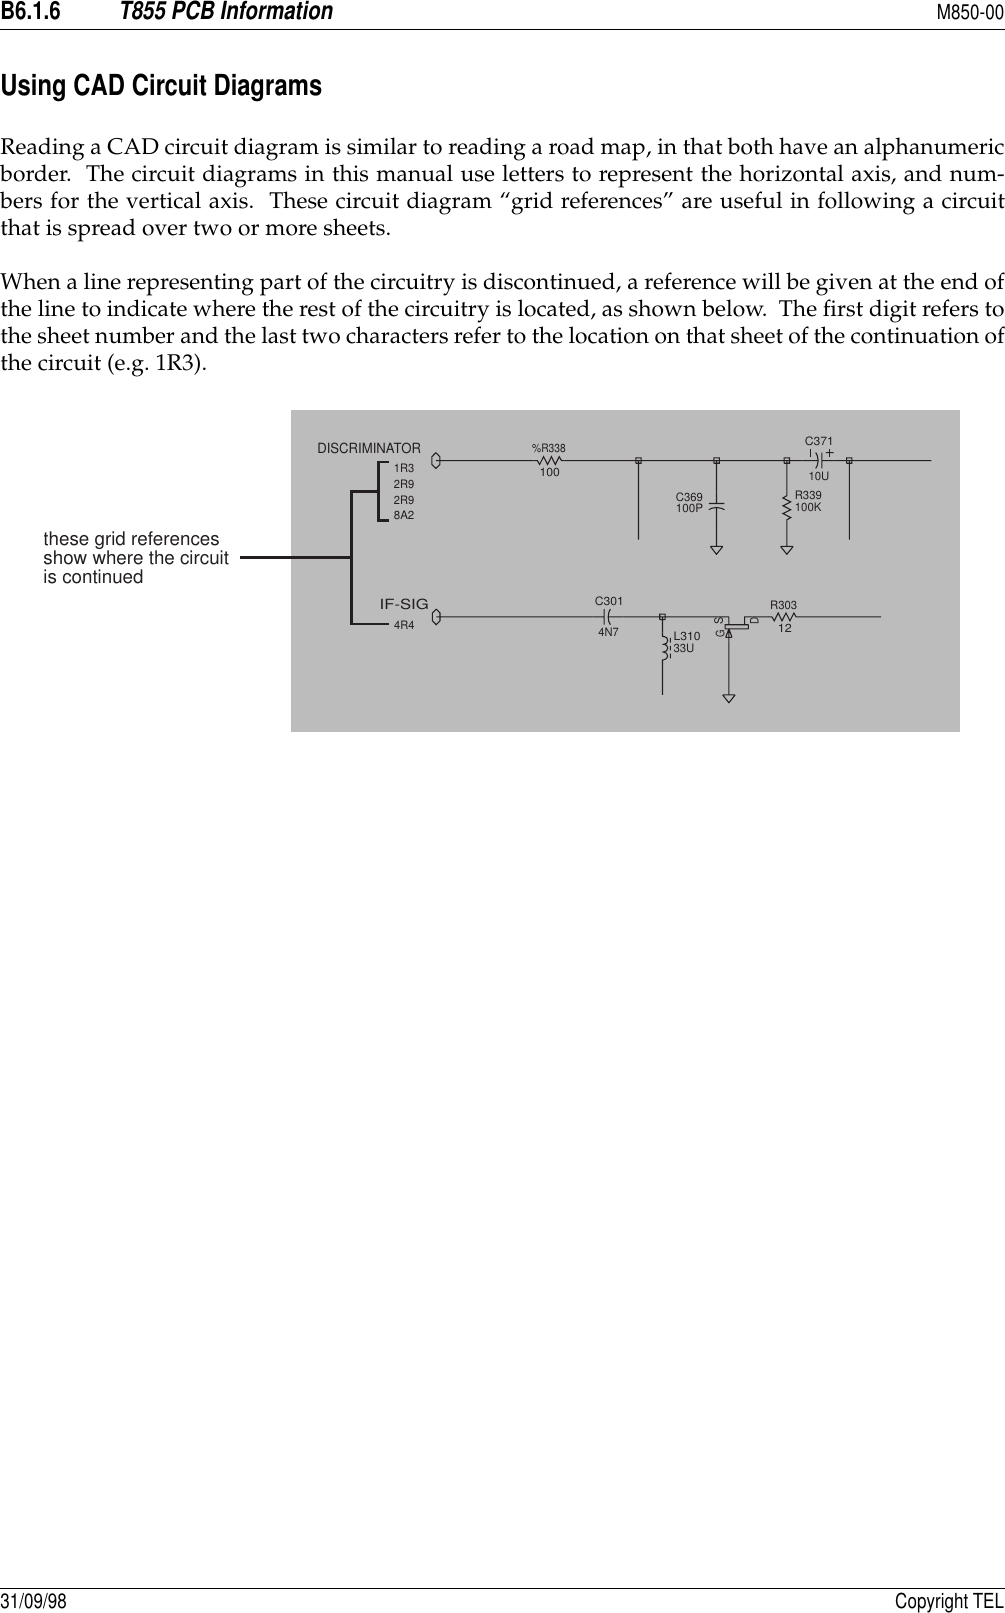 B6.1.6T855 PCB InformationM850-0031/09/98 Copyright TELUsing CAD Circuit DiagramsReading a CAD circuit diagram is similar to reading a road map, in that both have an alphanumericborder.  The circuit diagrams in this manual use letters to represent the horizontal axis, and num-bers for the vertical axis.  These circuit diagram “grid references” are useful in following a circuitthat is spread over two or more sheets.When a line representing part of the circuitry is discontinued, a reference will be given at the end ofthe line to indicate where the rest of the circuitry is located, as shown below.  The first digit refers tothe sheet number and the last two characters refer to the location on that sheet of the continuation ofthe circuit (e.g. 1R3).C3014N7R30312DSGL31033UIF-SIG4R4C369100PC37110UR339100K%R338100DISCRIMINATOR1R32R92R98A2these grid referencesshow where the circuitis continued